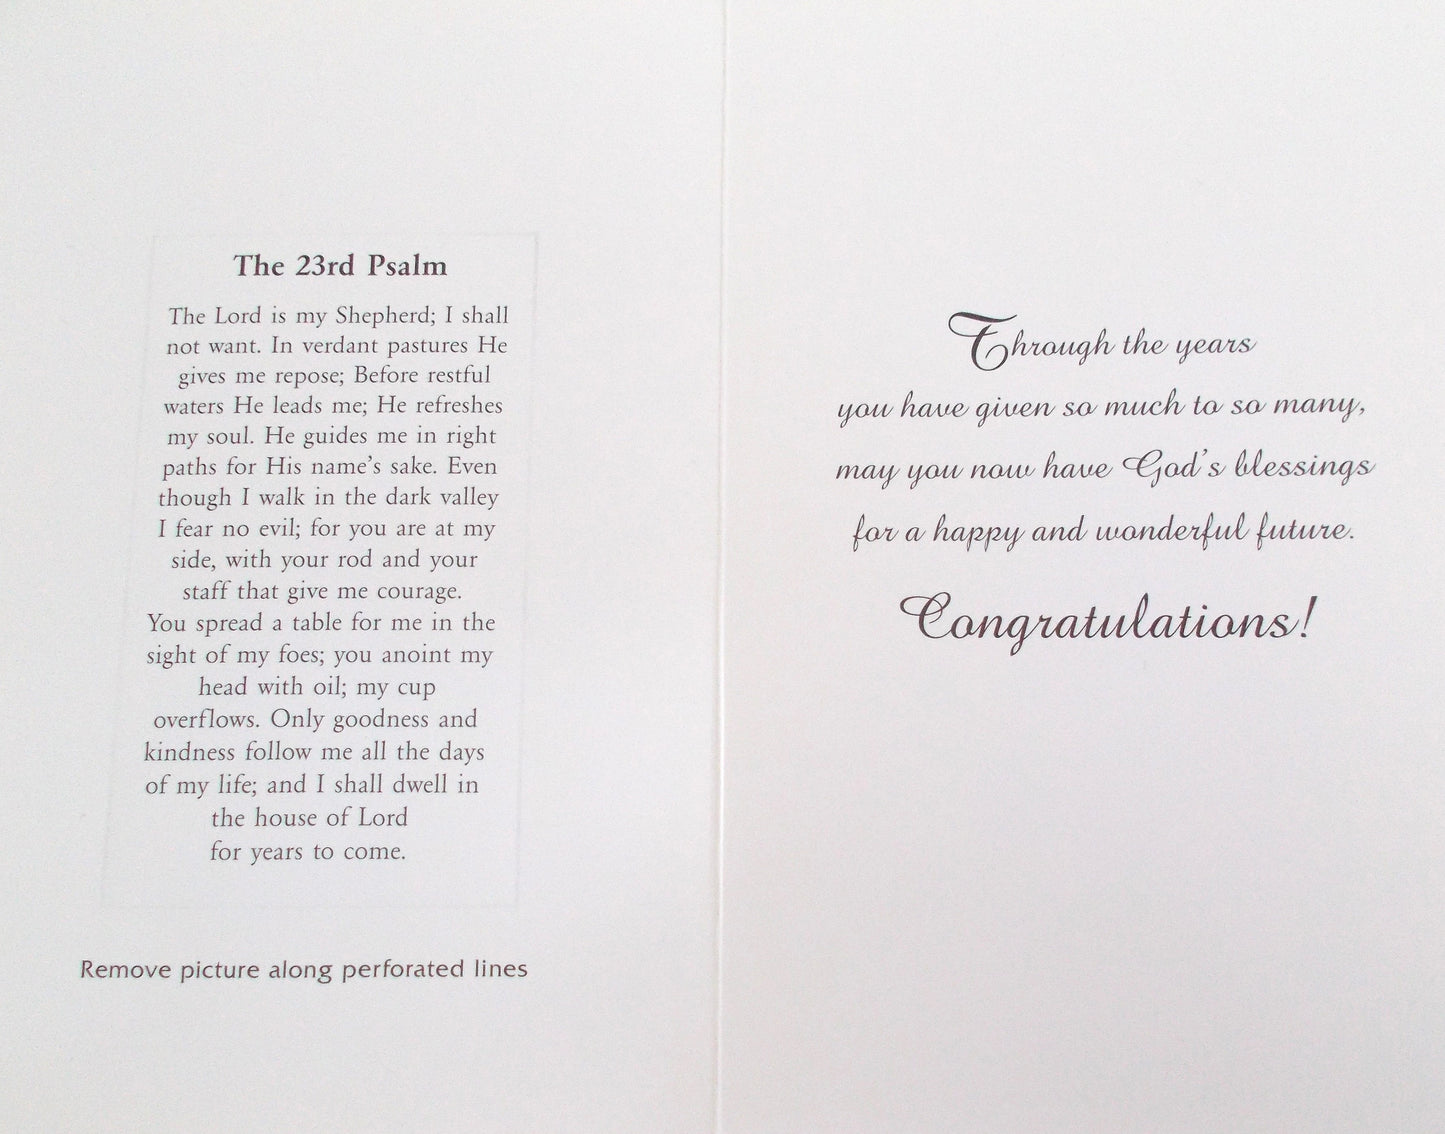 Retirement Greeting Card - Jesus - with 23rd Psalm Removable Prayercard